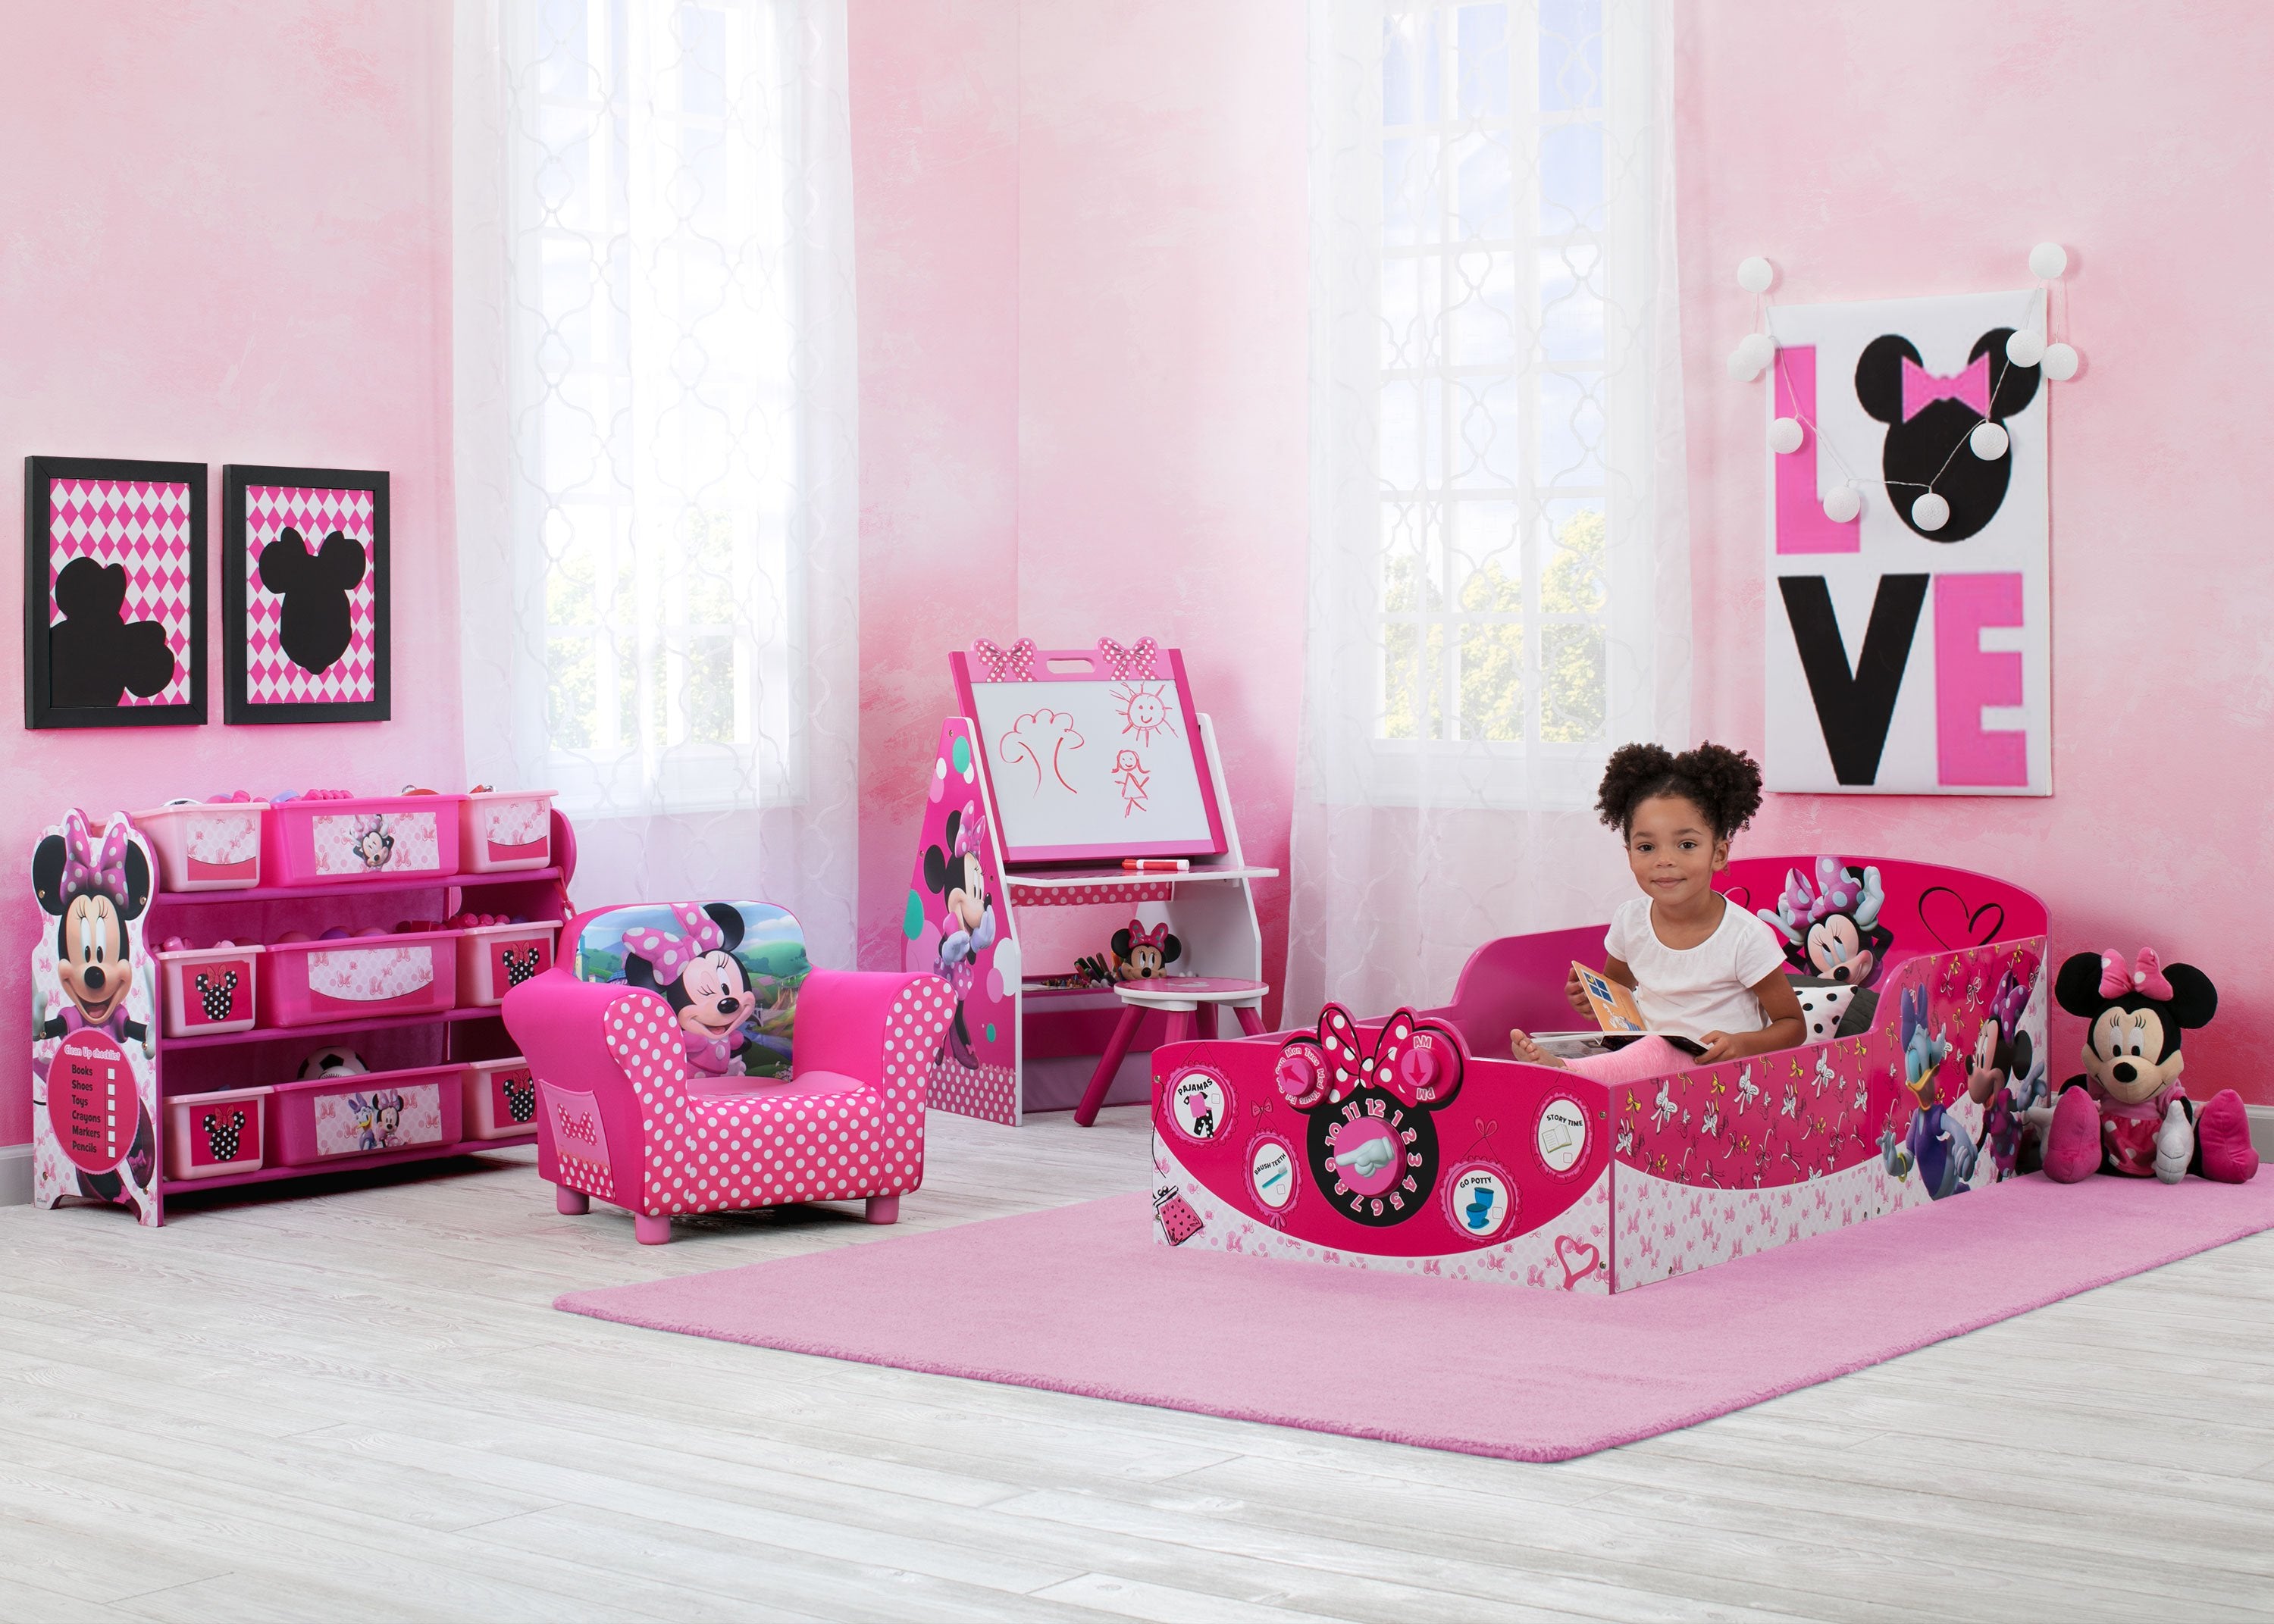 delta minnie mouse bed